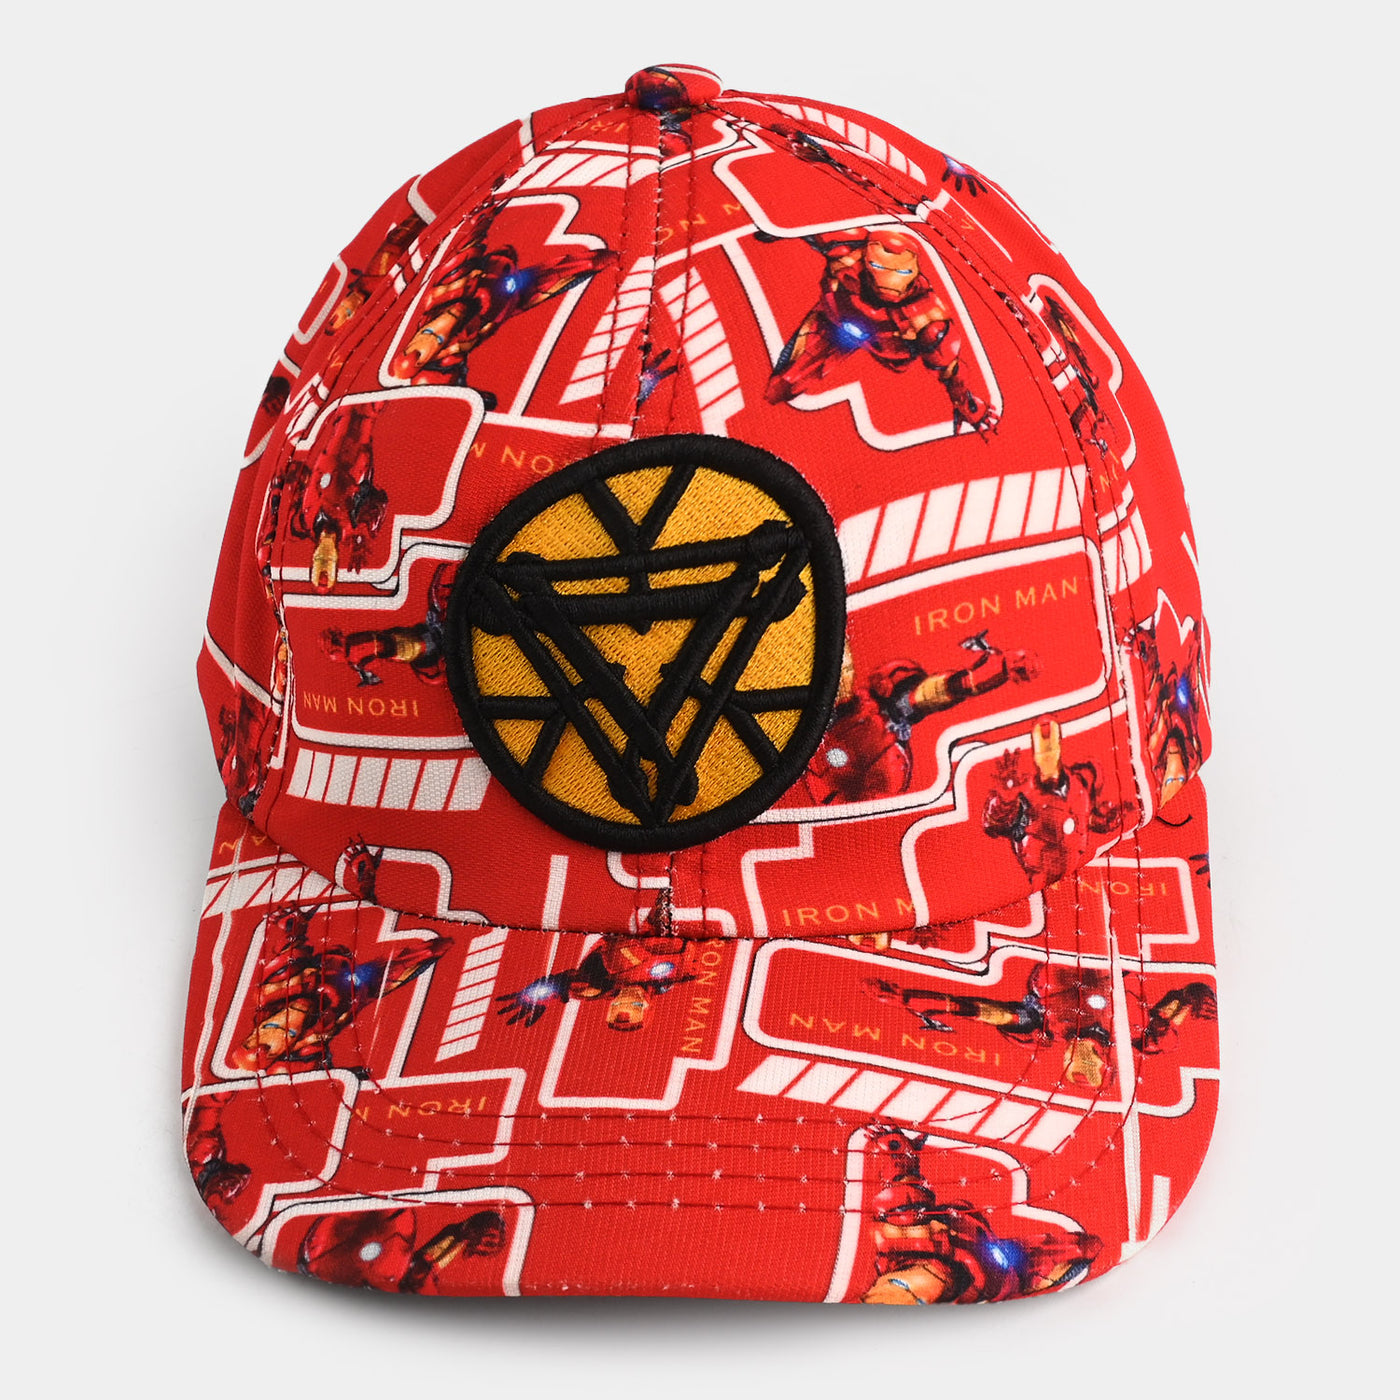 Stylish Cap/Hat For Kids - Heroic | 3Y+